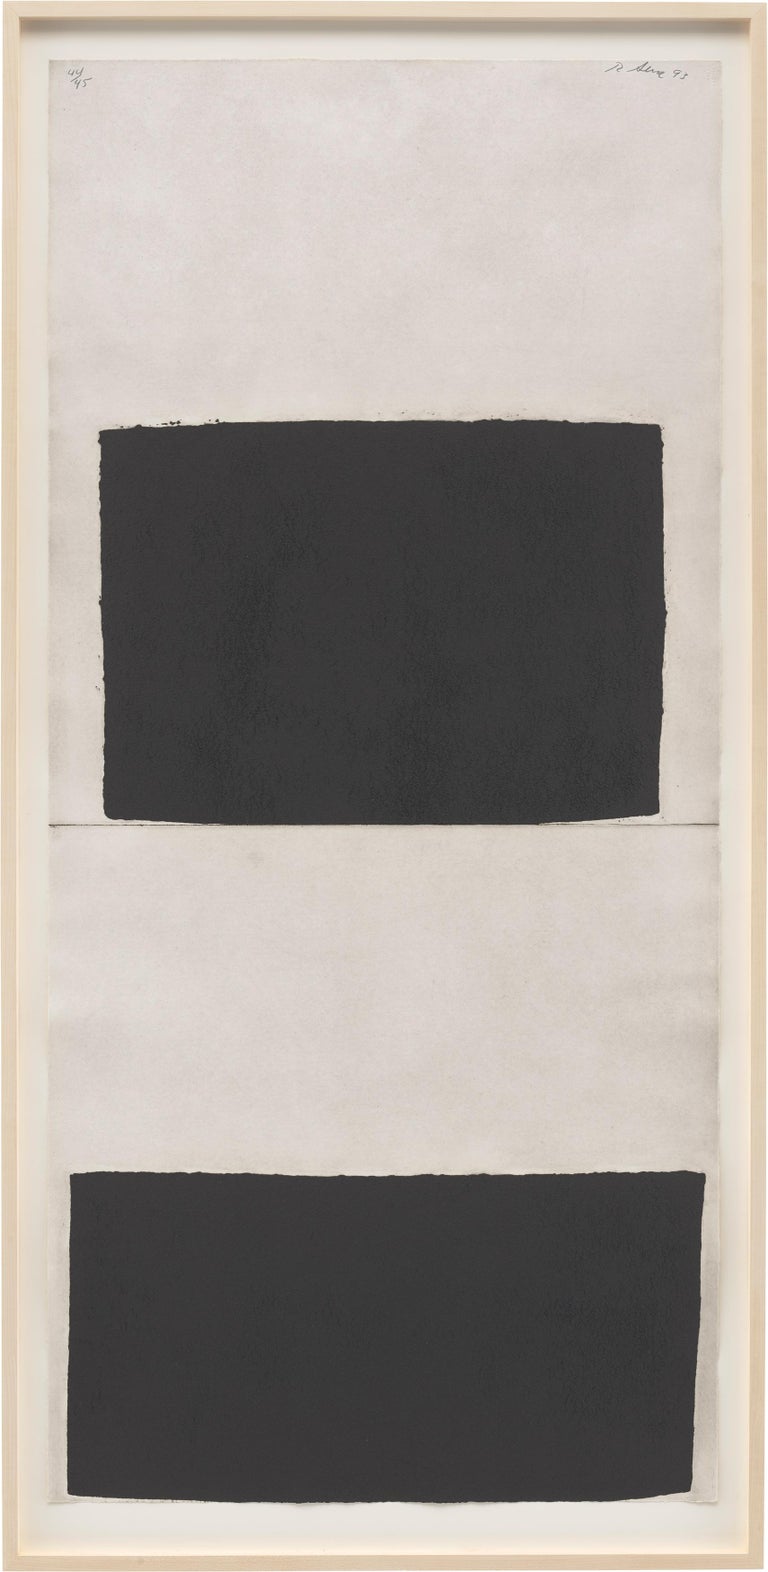 Weight and Measure - Contemporary Print by Richard Serra